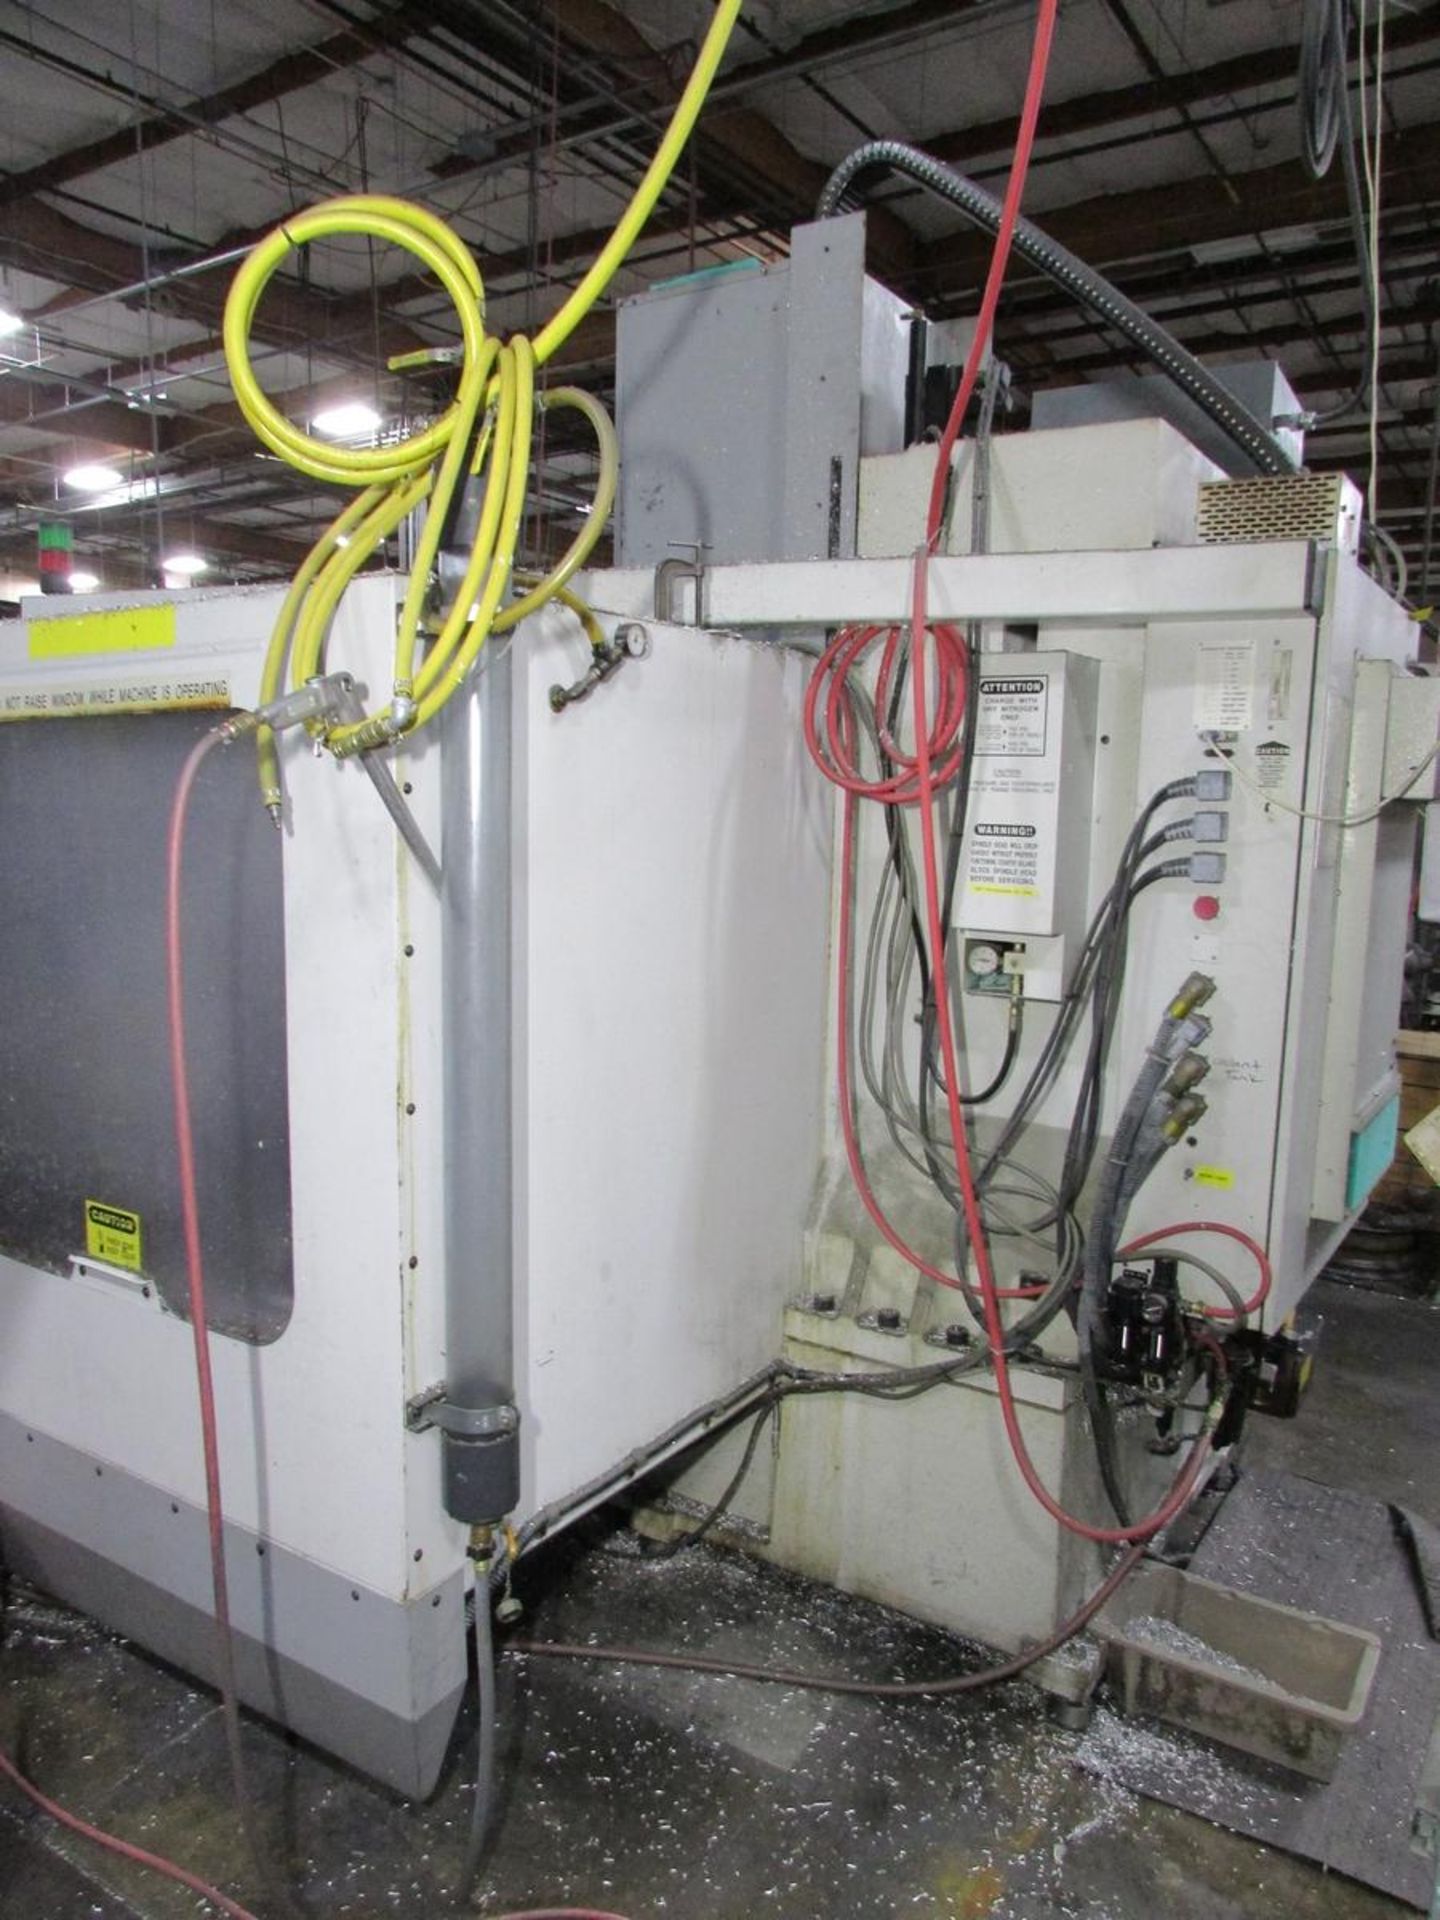 1996 Haas VF-3 3-Axis CNC Vertical Maching Center w/ SMW 200S Setup Switcher Pallet System - Image 15 of 23